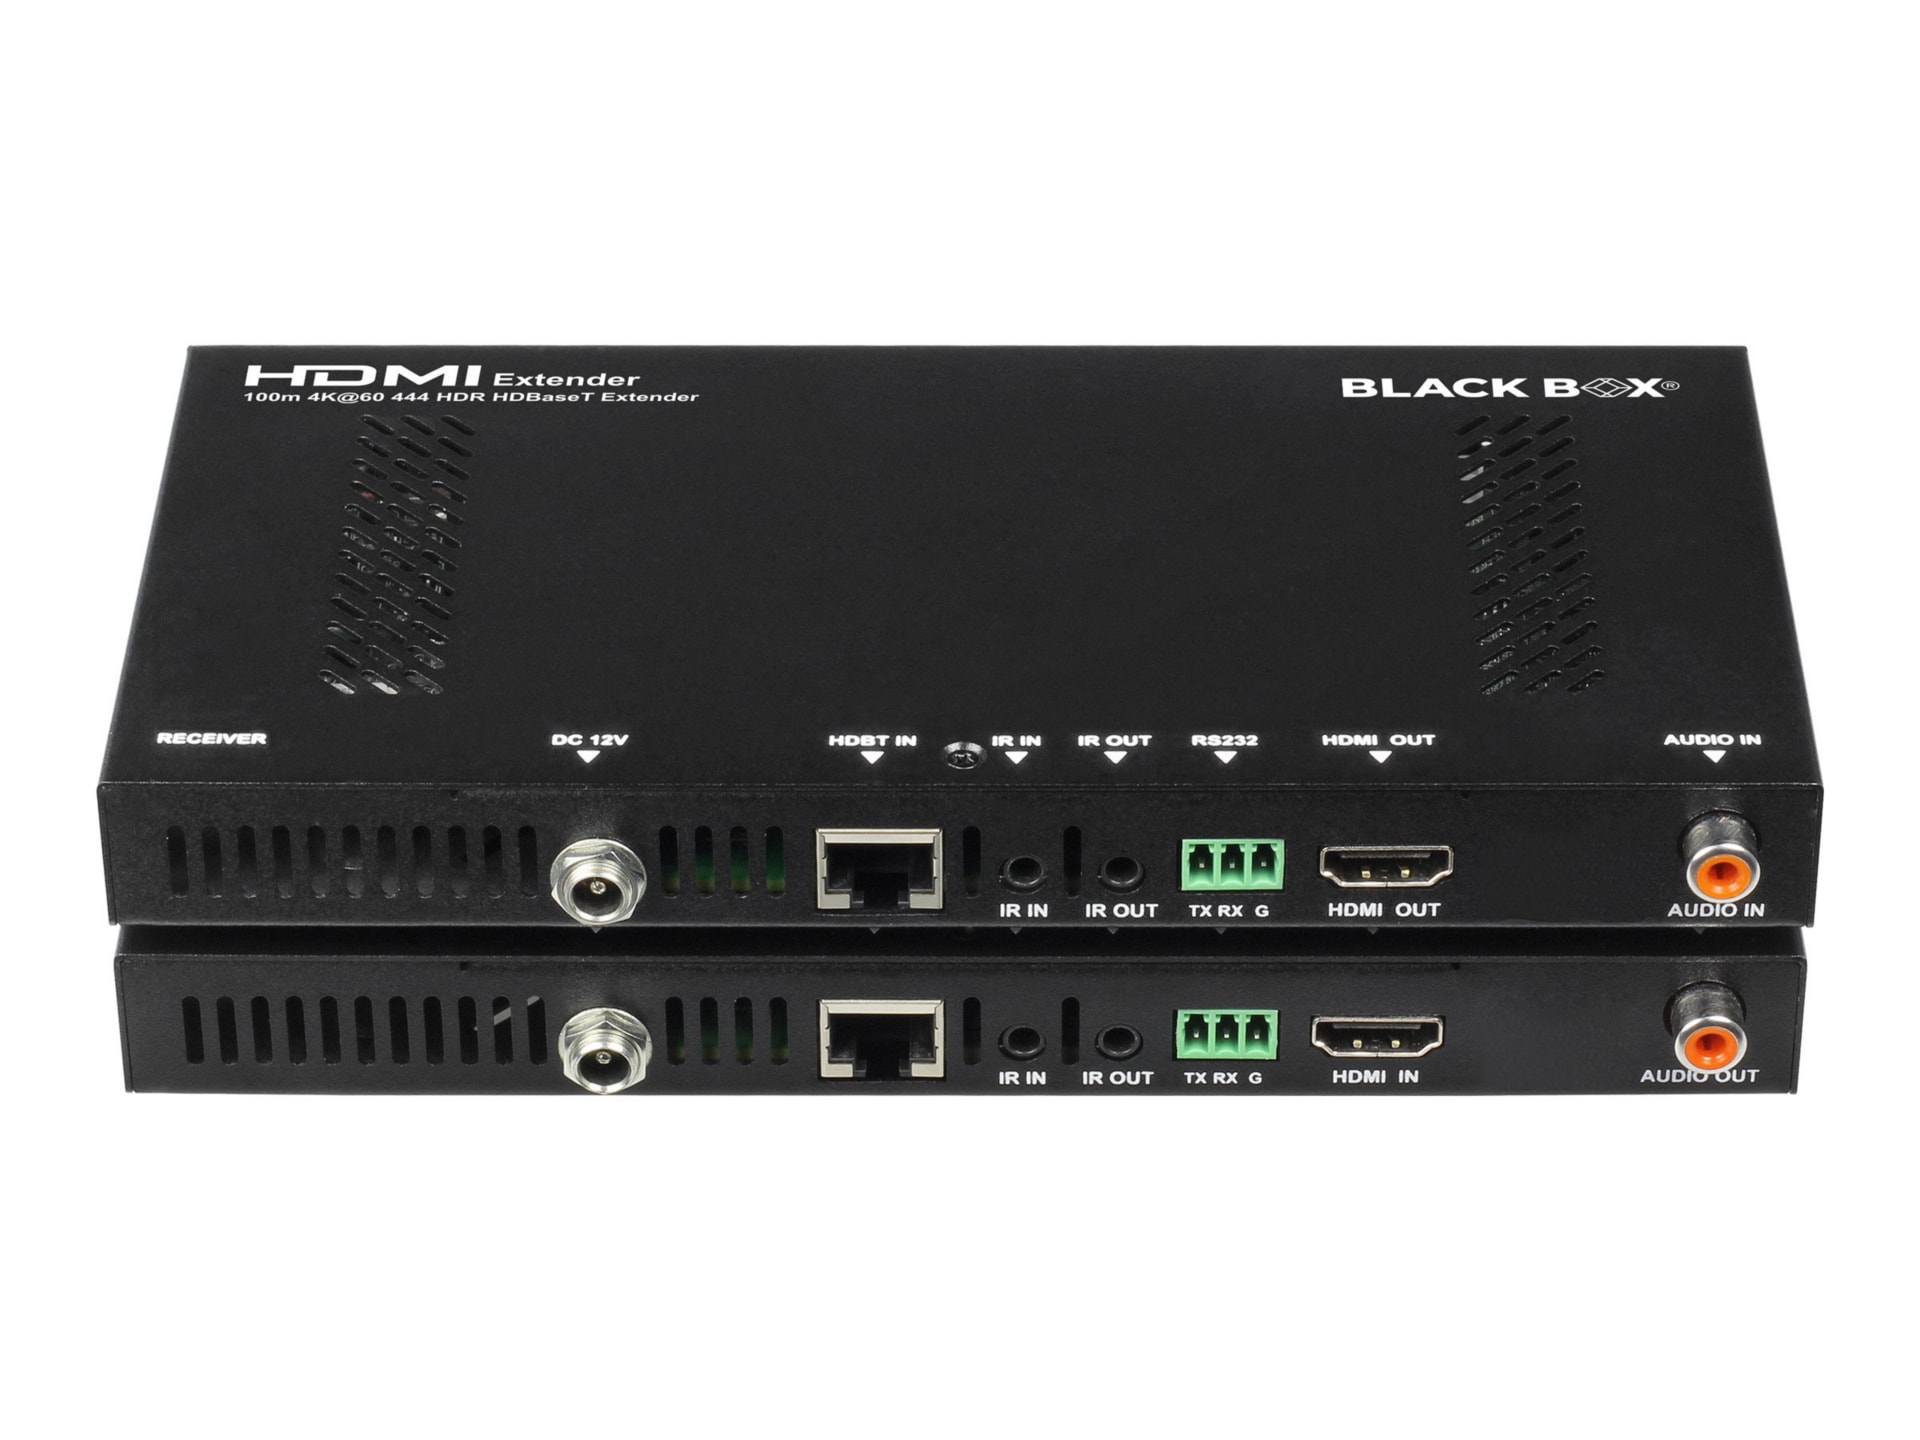 Black Box - video/audio/infrared/serial extender - RS-232, HDMI, infrared, CATx